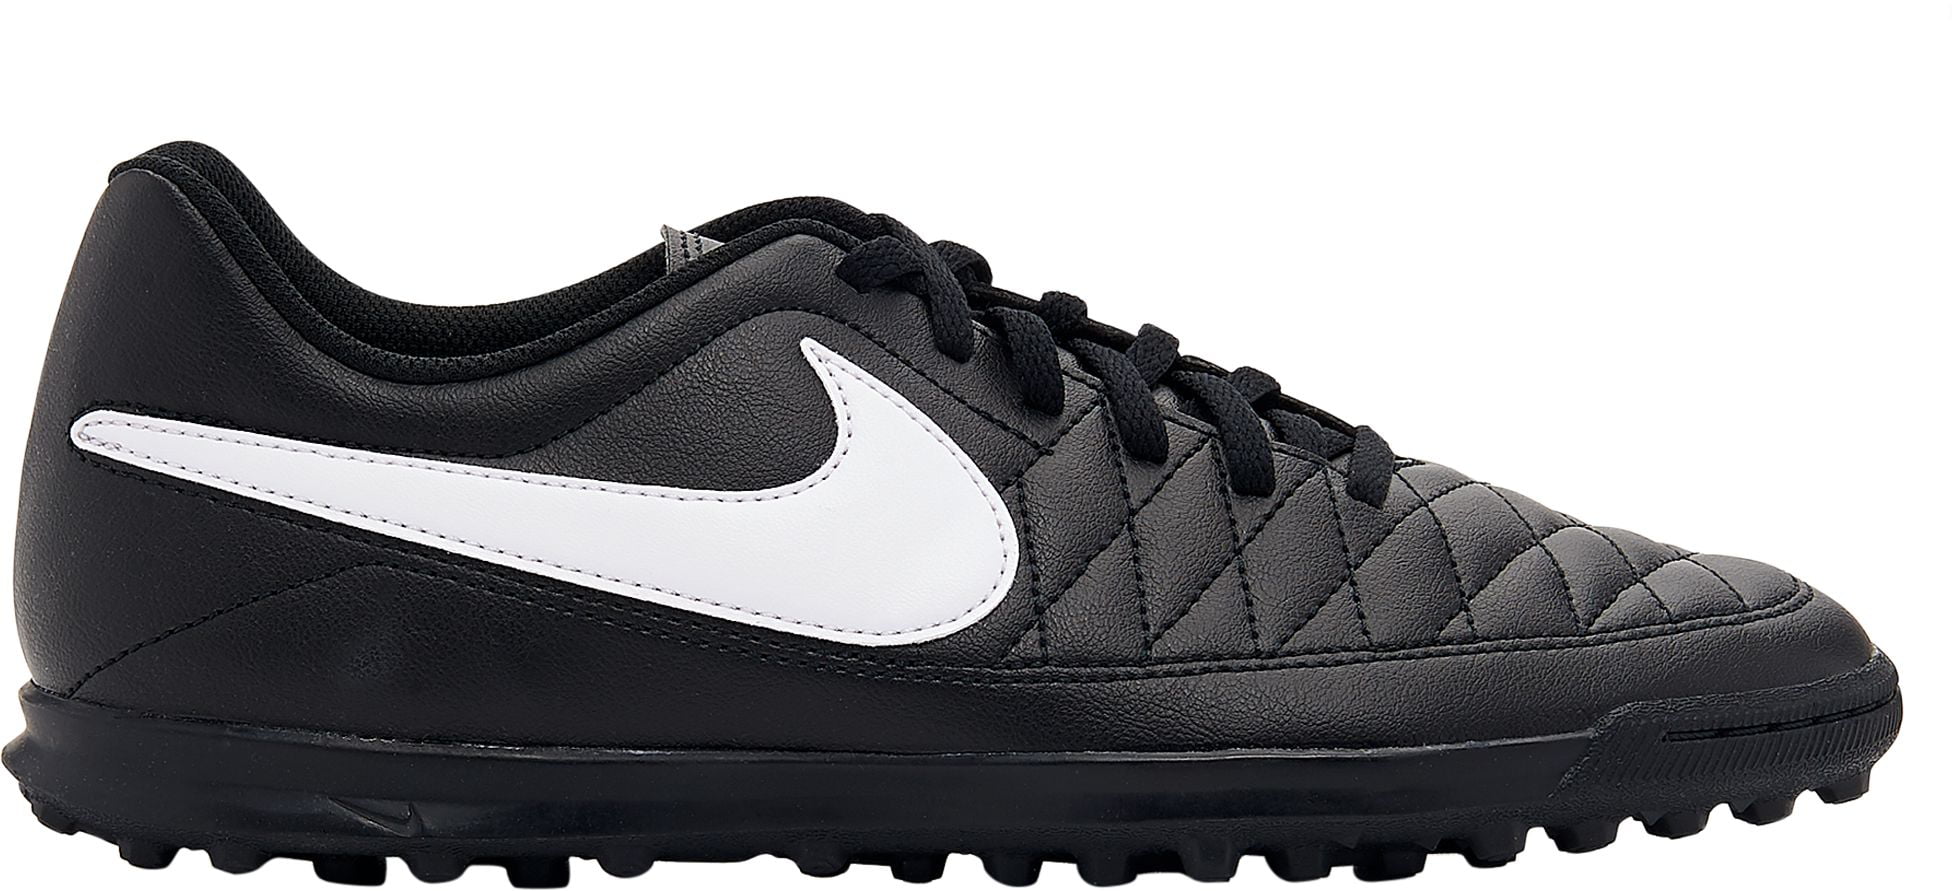 nike majestry tf mens football trainers